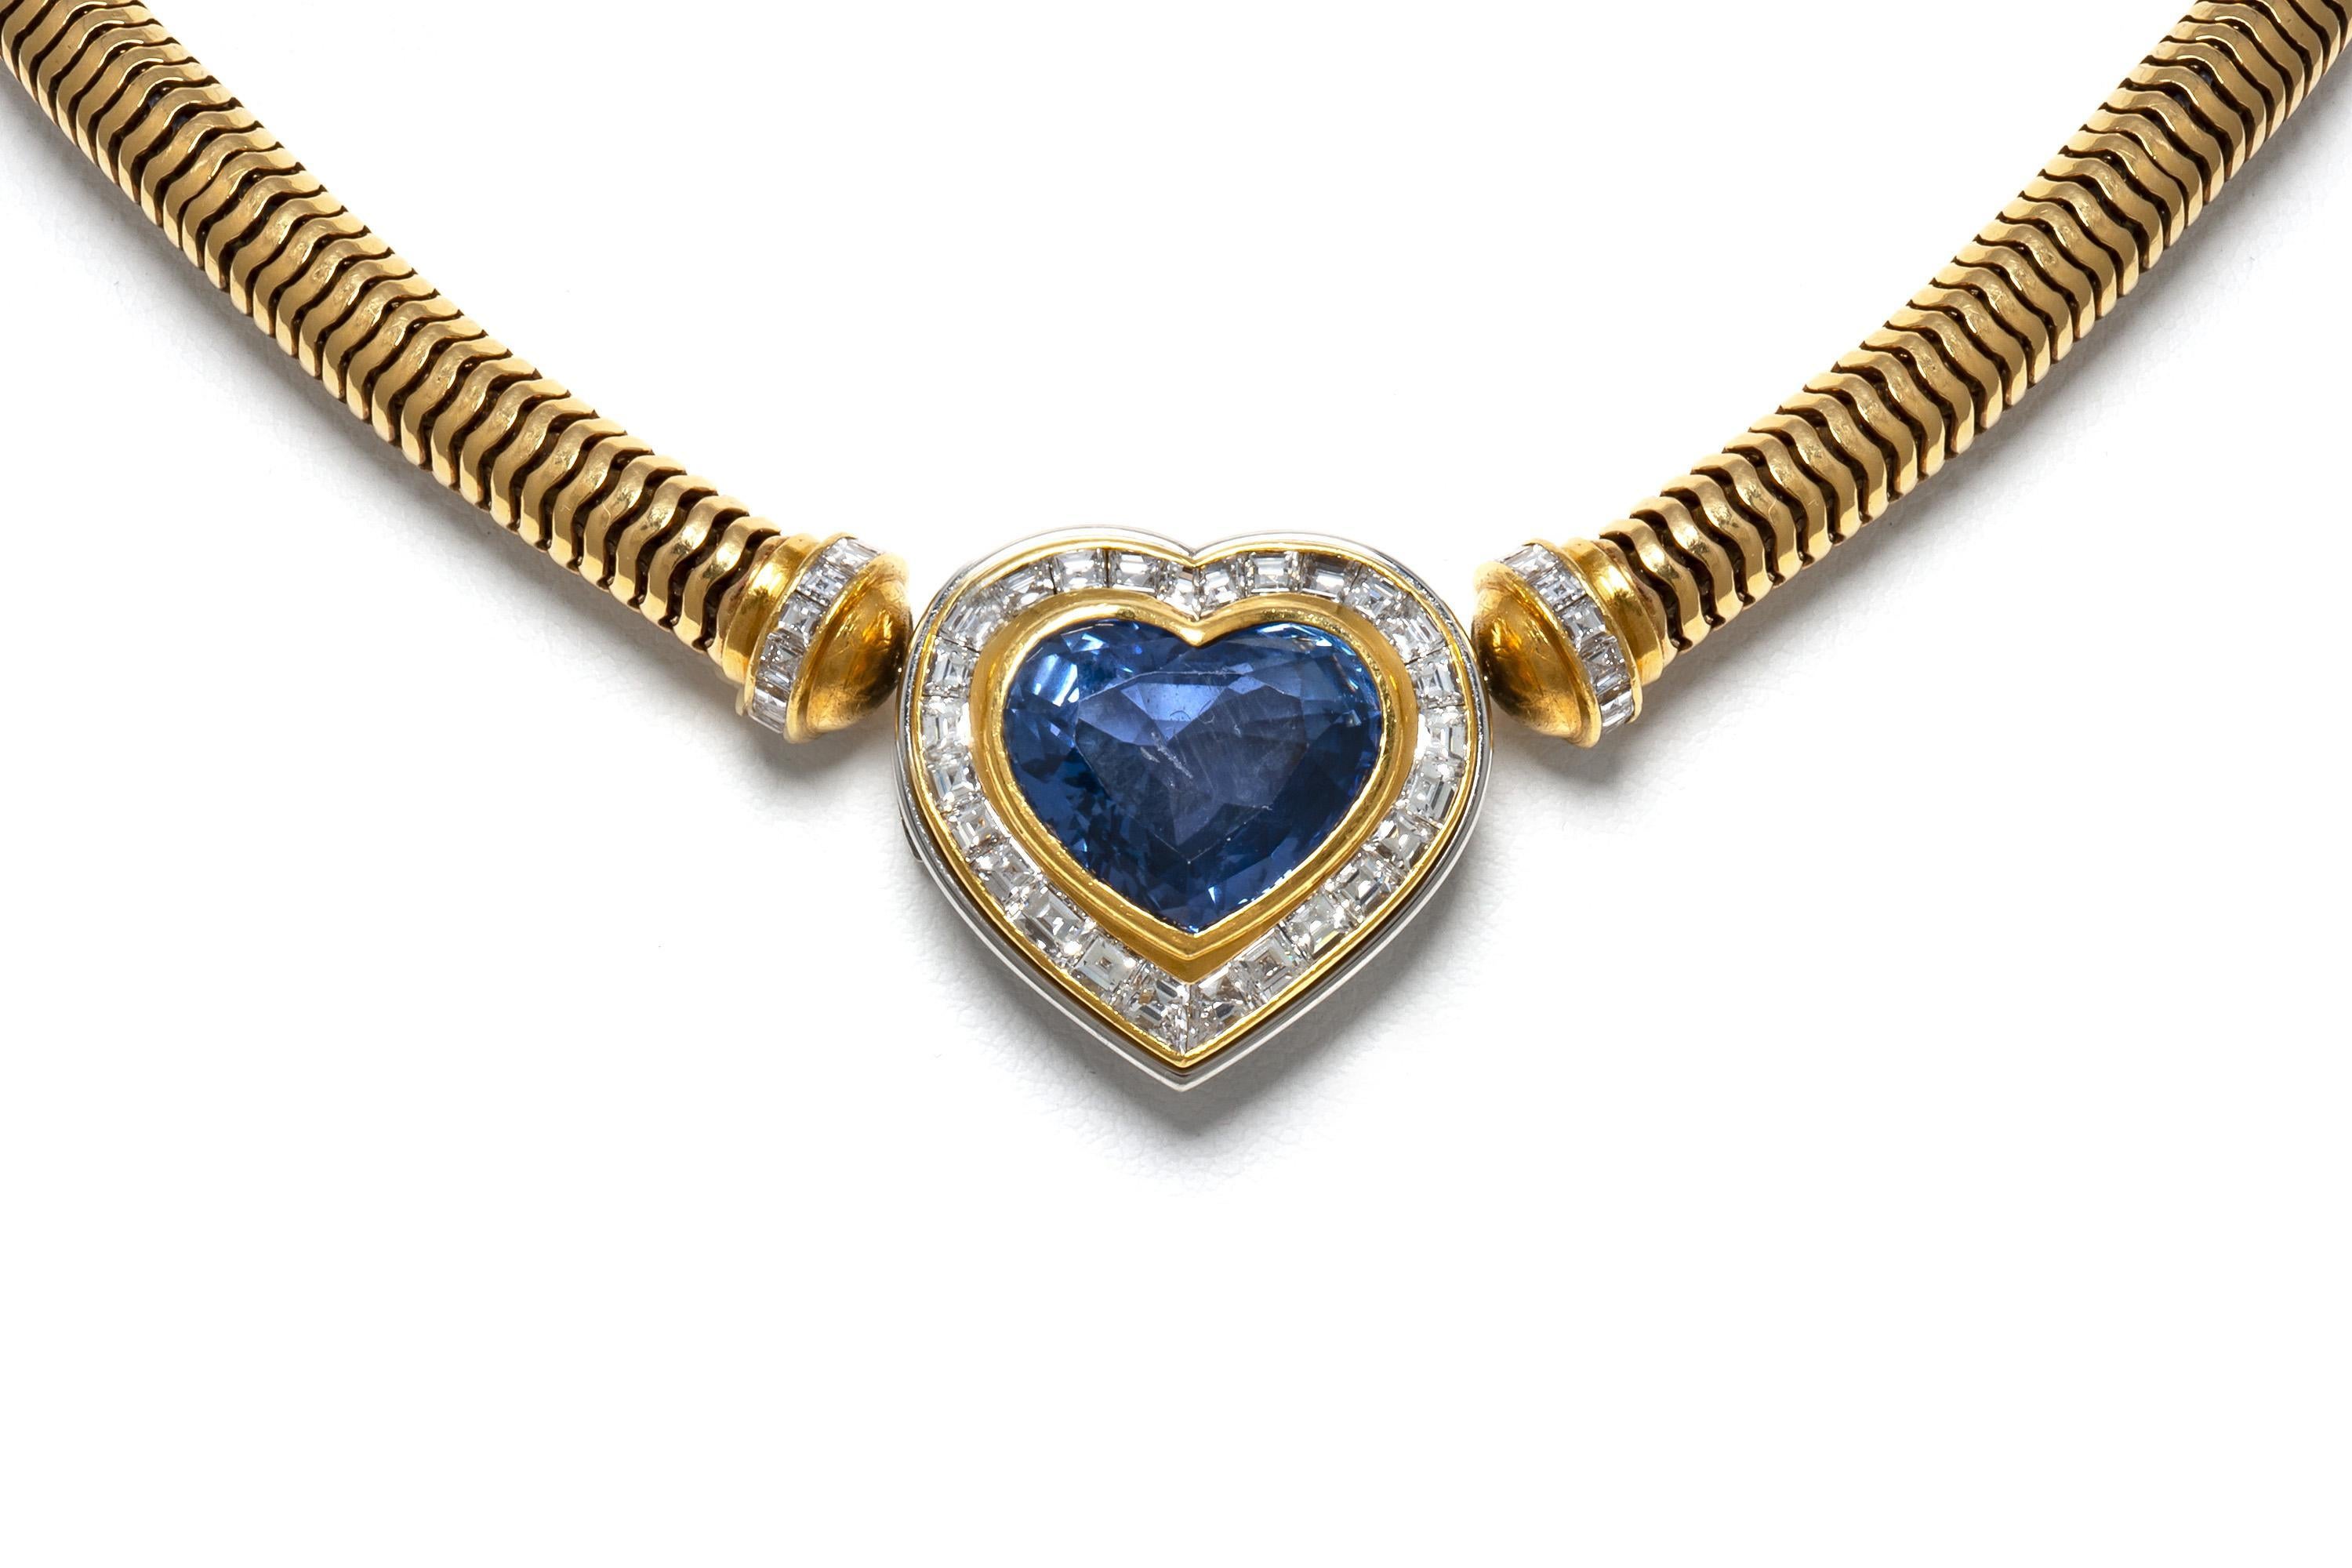 Heart Cut Vintage 1970s Hemmerle 20.00 Carat Heart-Shaped Sapphire Necklace with Diamonds